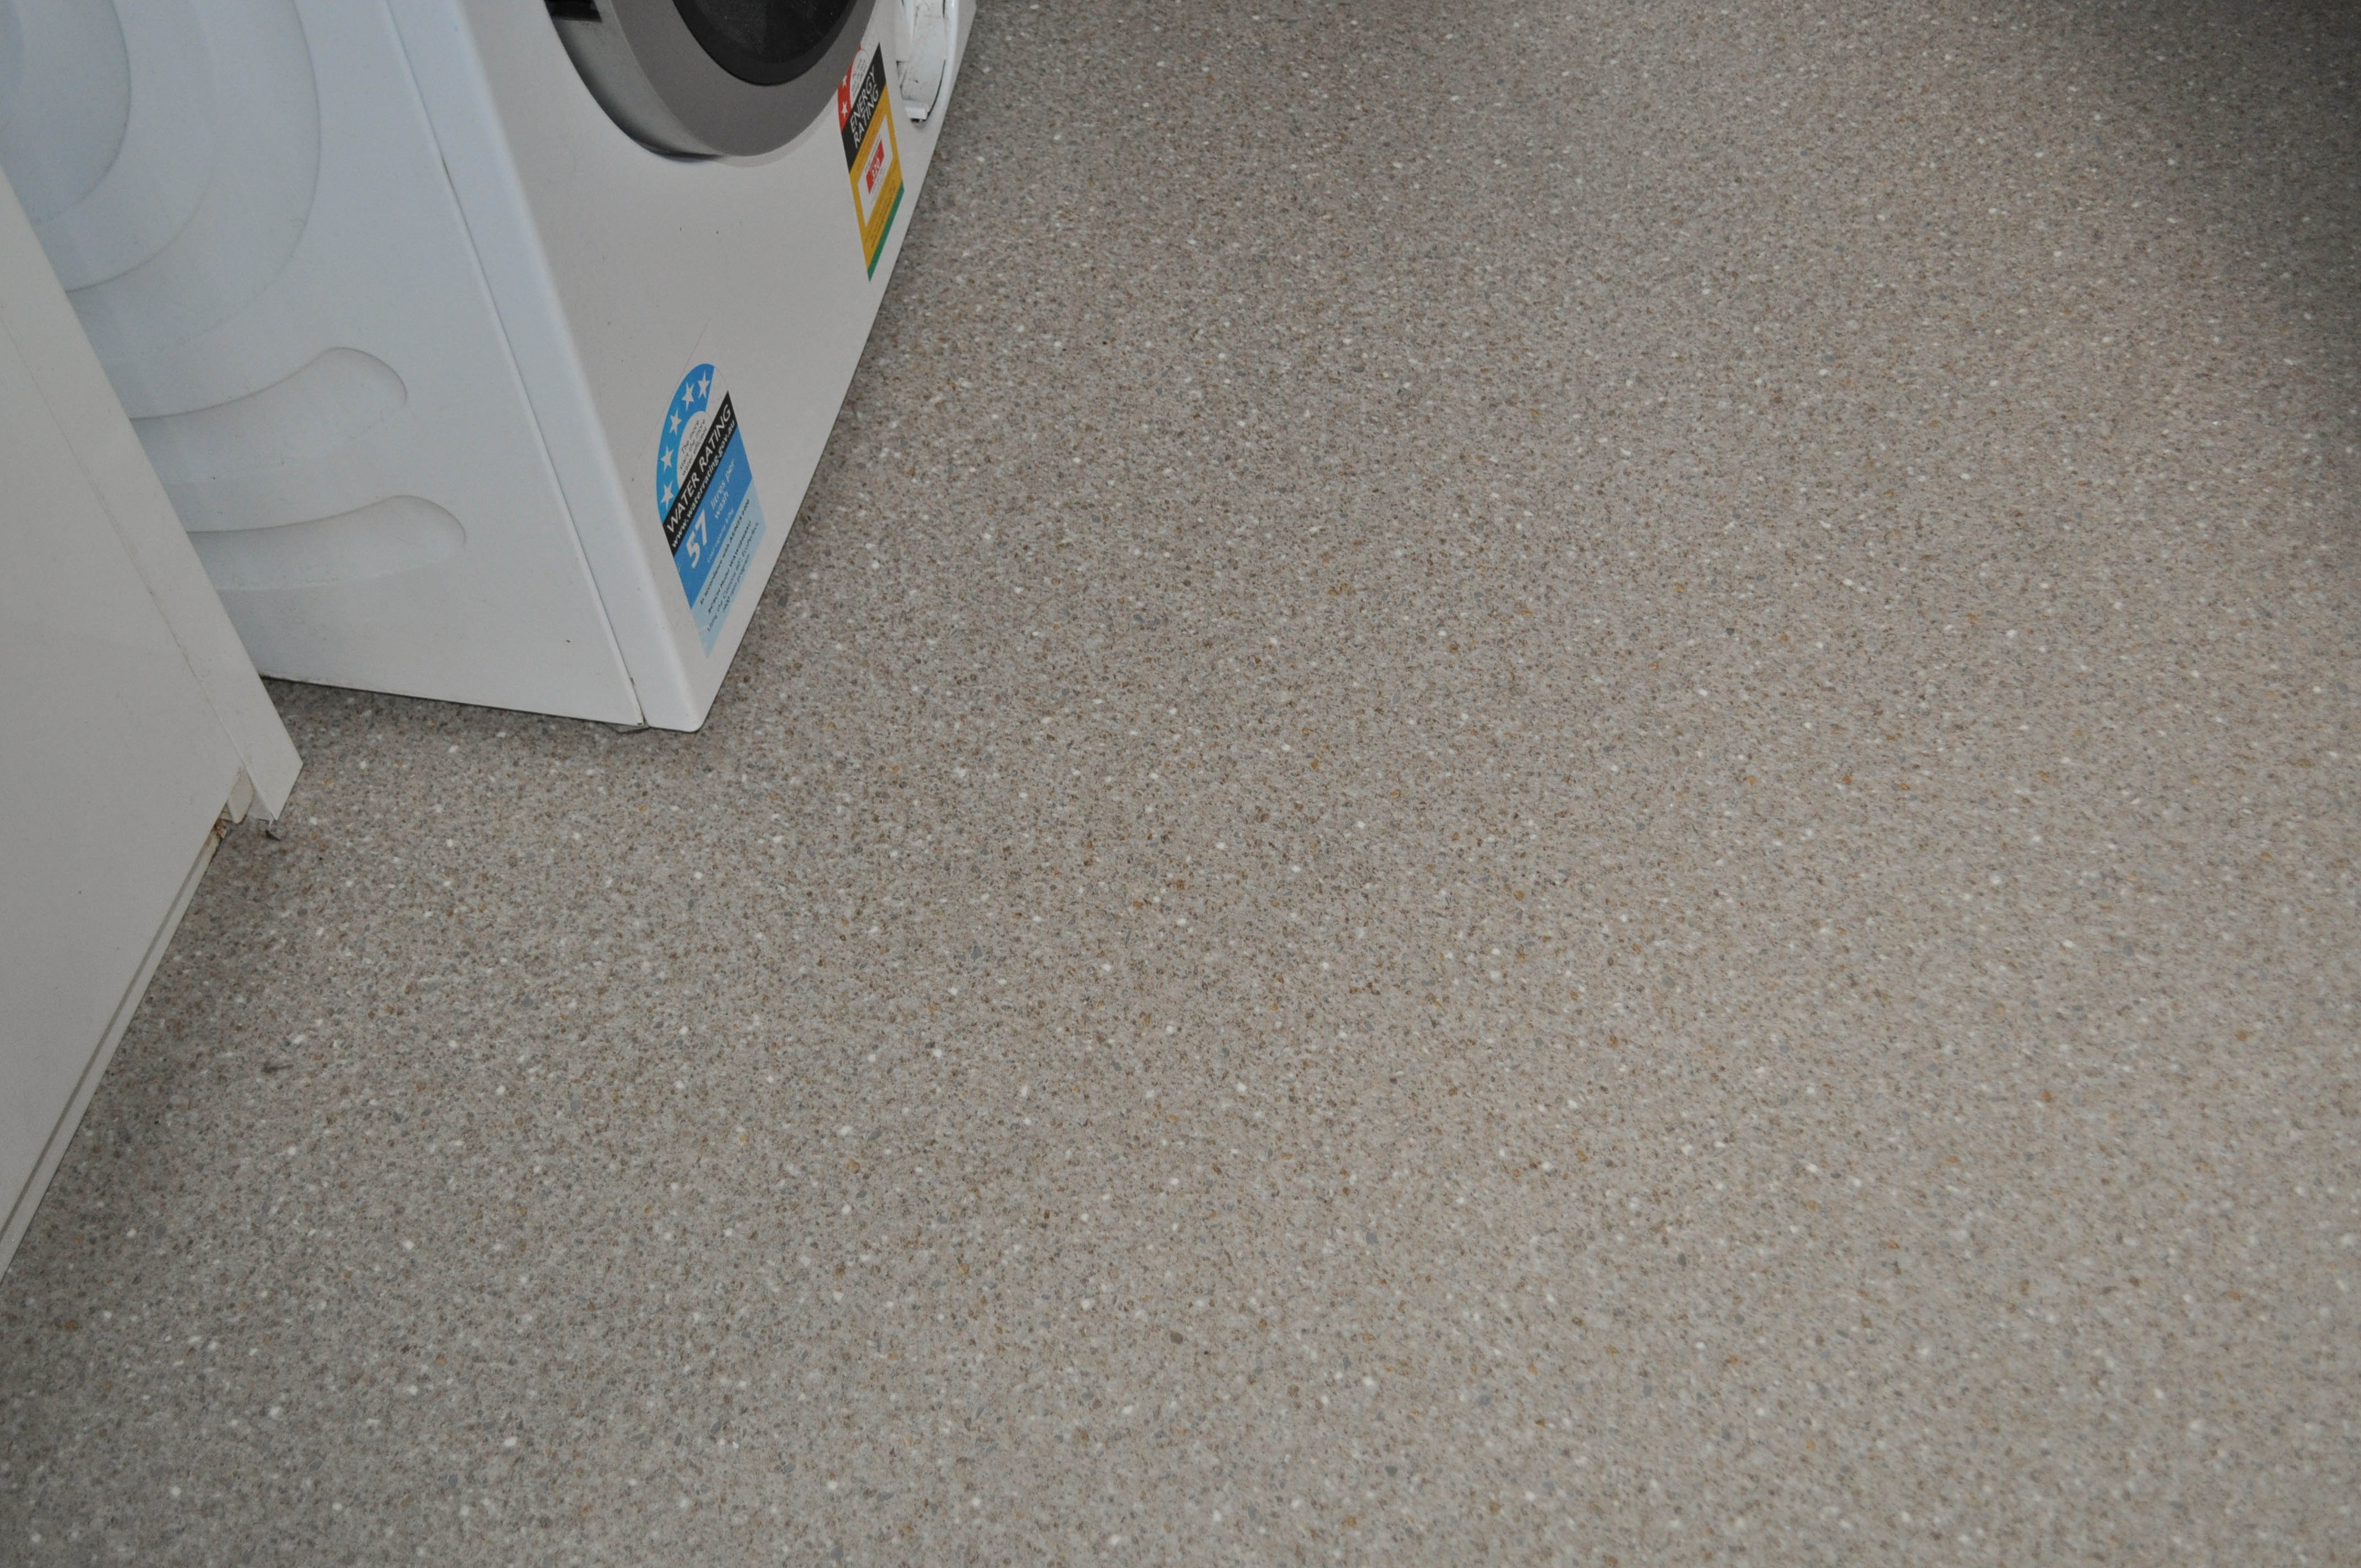 dommestic vinyl installed by Concord Floors, in a laundry, in a home in Diamond Creek, Vic, with a washing machine on it.
 It has a square tile look with green colors.